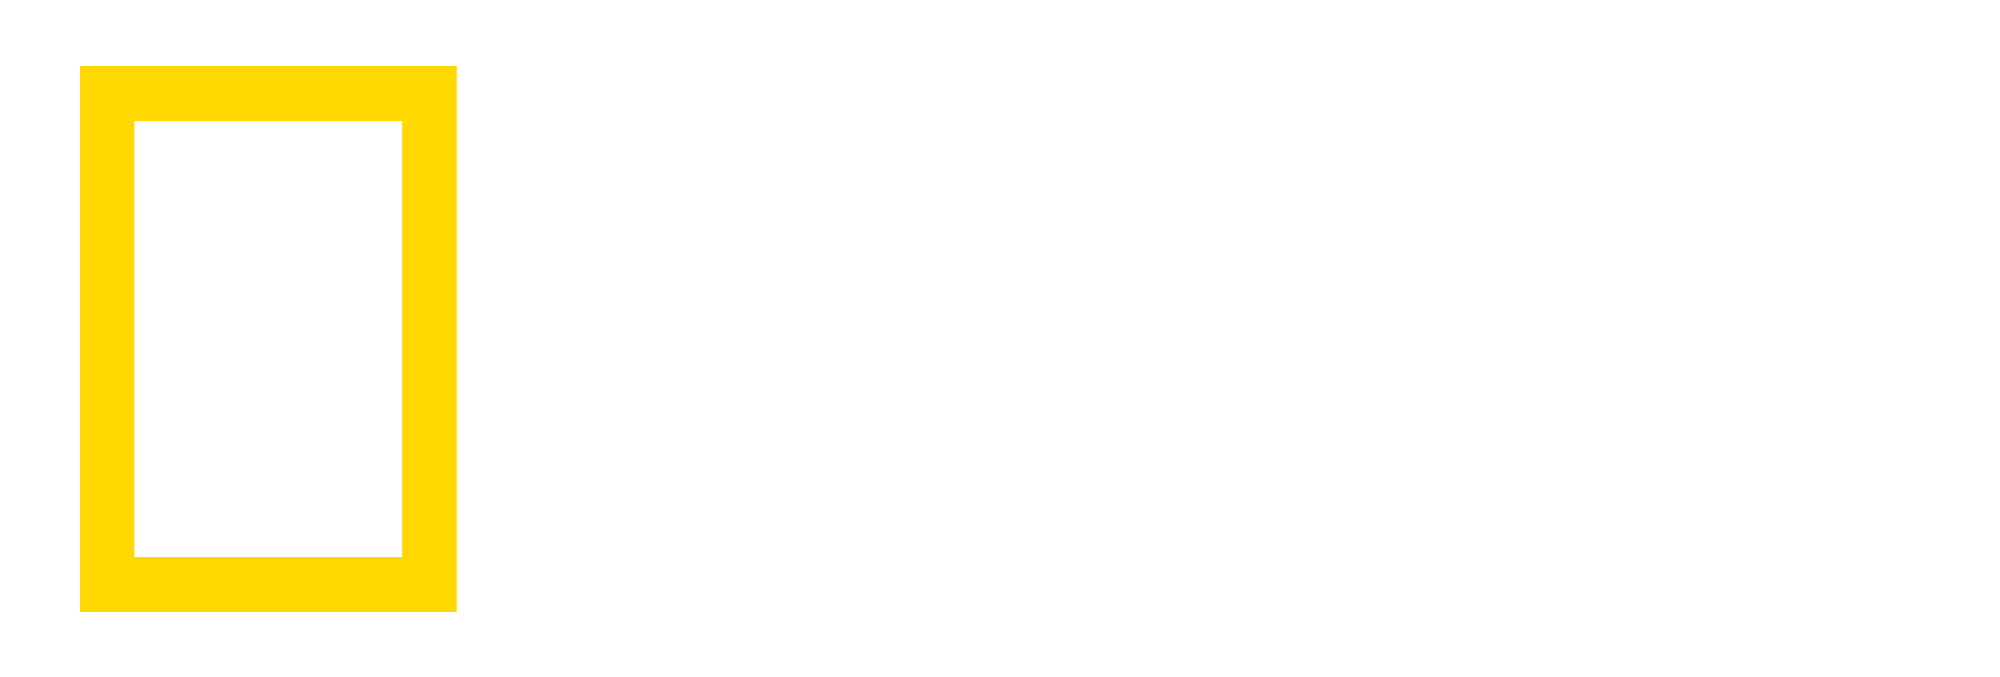 Ng_Logo_White.png - National Geographic Channel, Transparent background PNG HD thumbnail